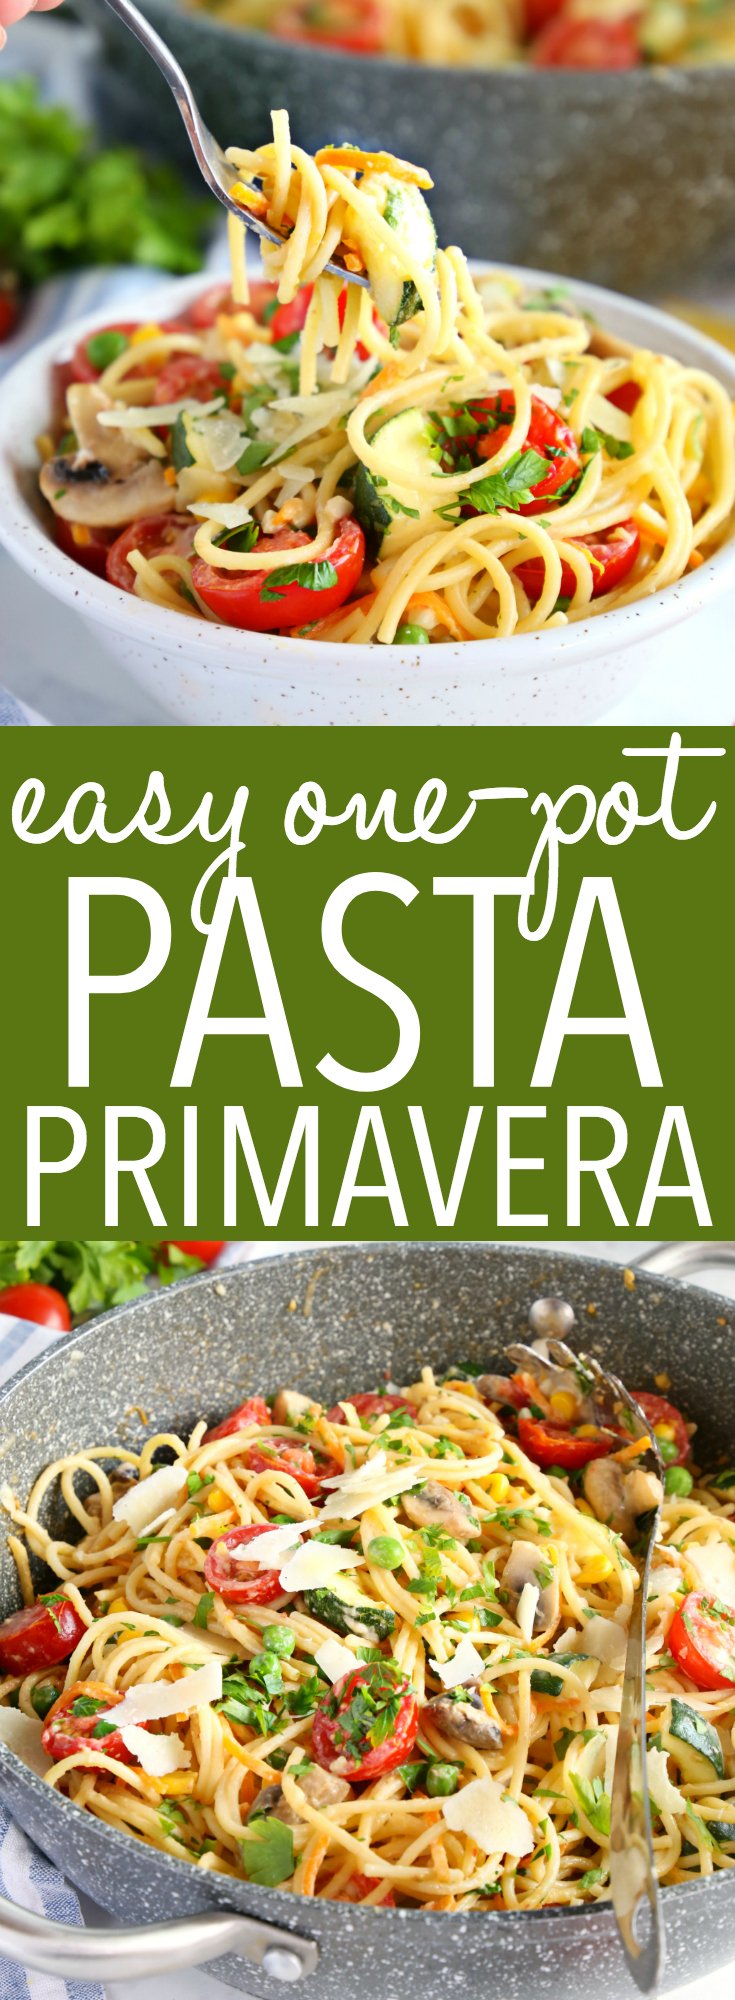 This Easy One Pot Pasta Primavera is going to become your family’s new favourite healthy weeknight meal! It’s made with basic ingredients you probably already have in your kitchen, and it’s so creamy and delicious! Recipe from thebusybaker.ca! #easy #recipe #pasta #onepot #onepan #healthy #veggies #vegetarian #light #weightloss #fresh #farmersmarket #homemade #simple #beginner #vegan #vegetables #sidedish #maindish via @busybakerblog